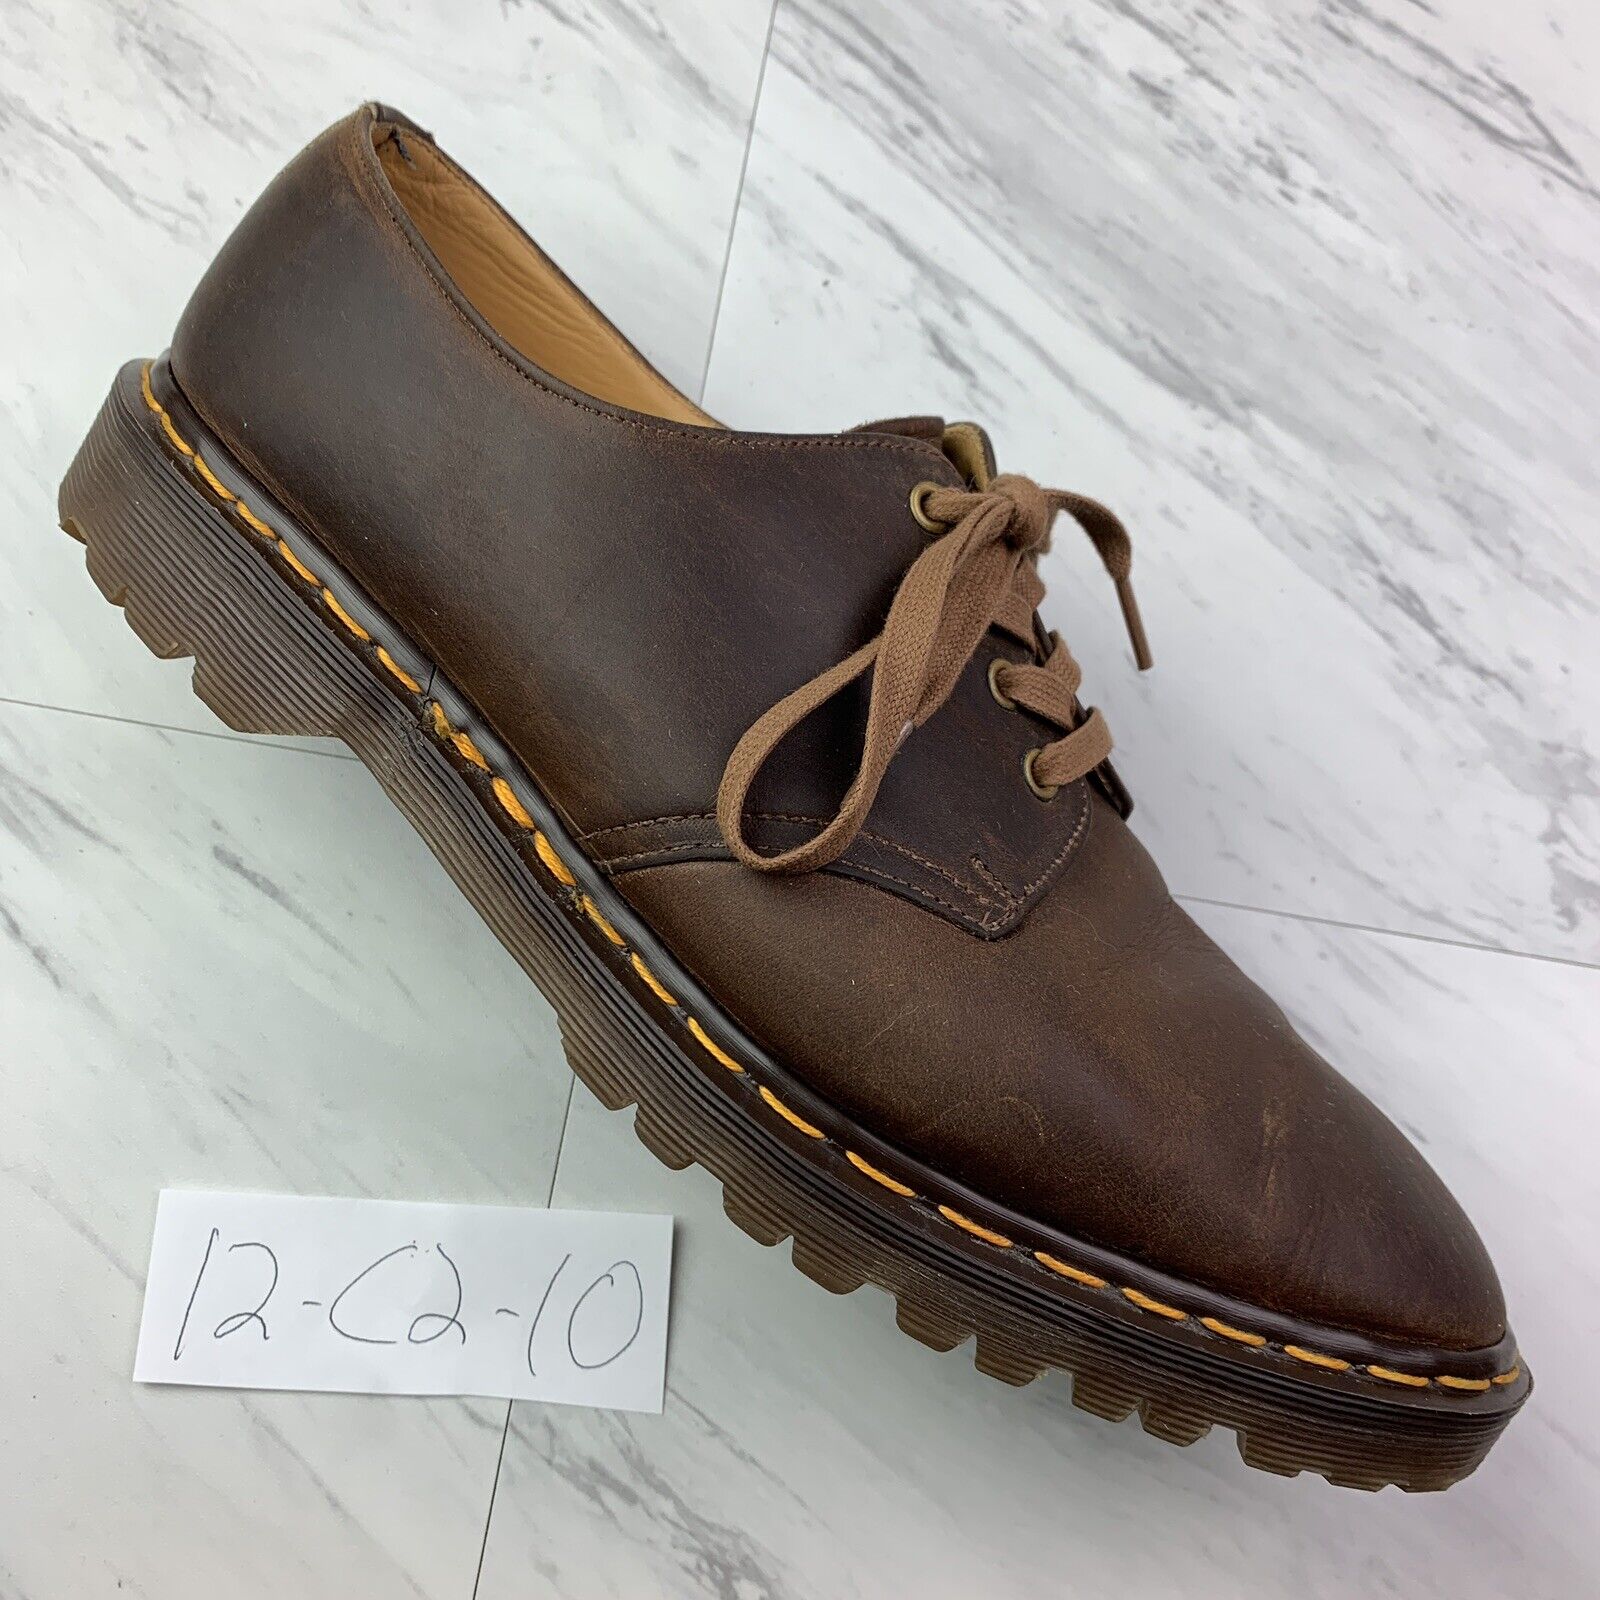 DOC Dr Year-end annual account Martens Oxford Shoes Size Leather Brown MADE ENGL Year-end gift 12 IN